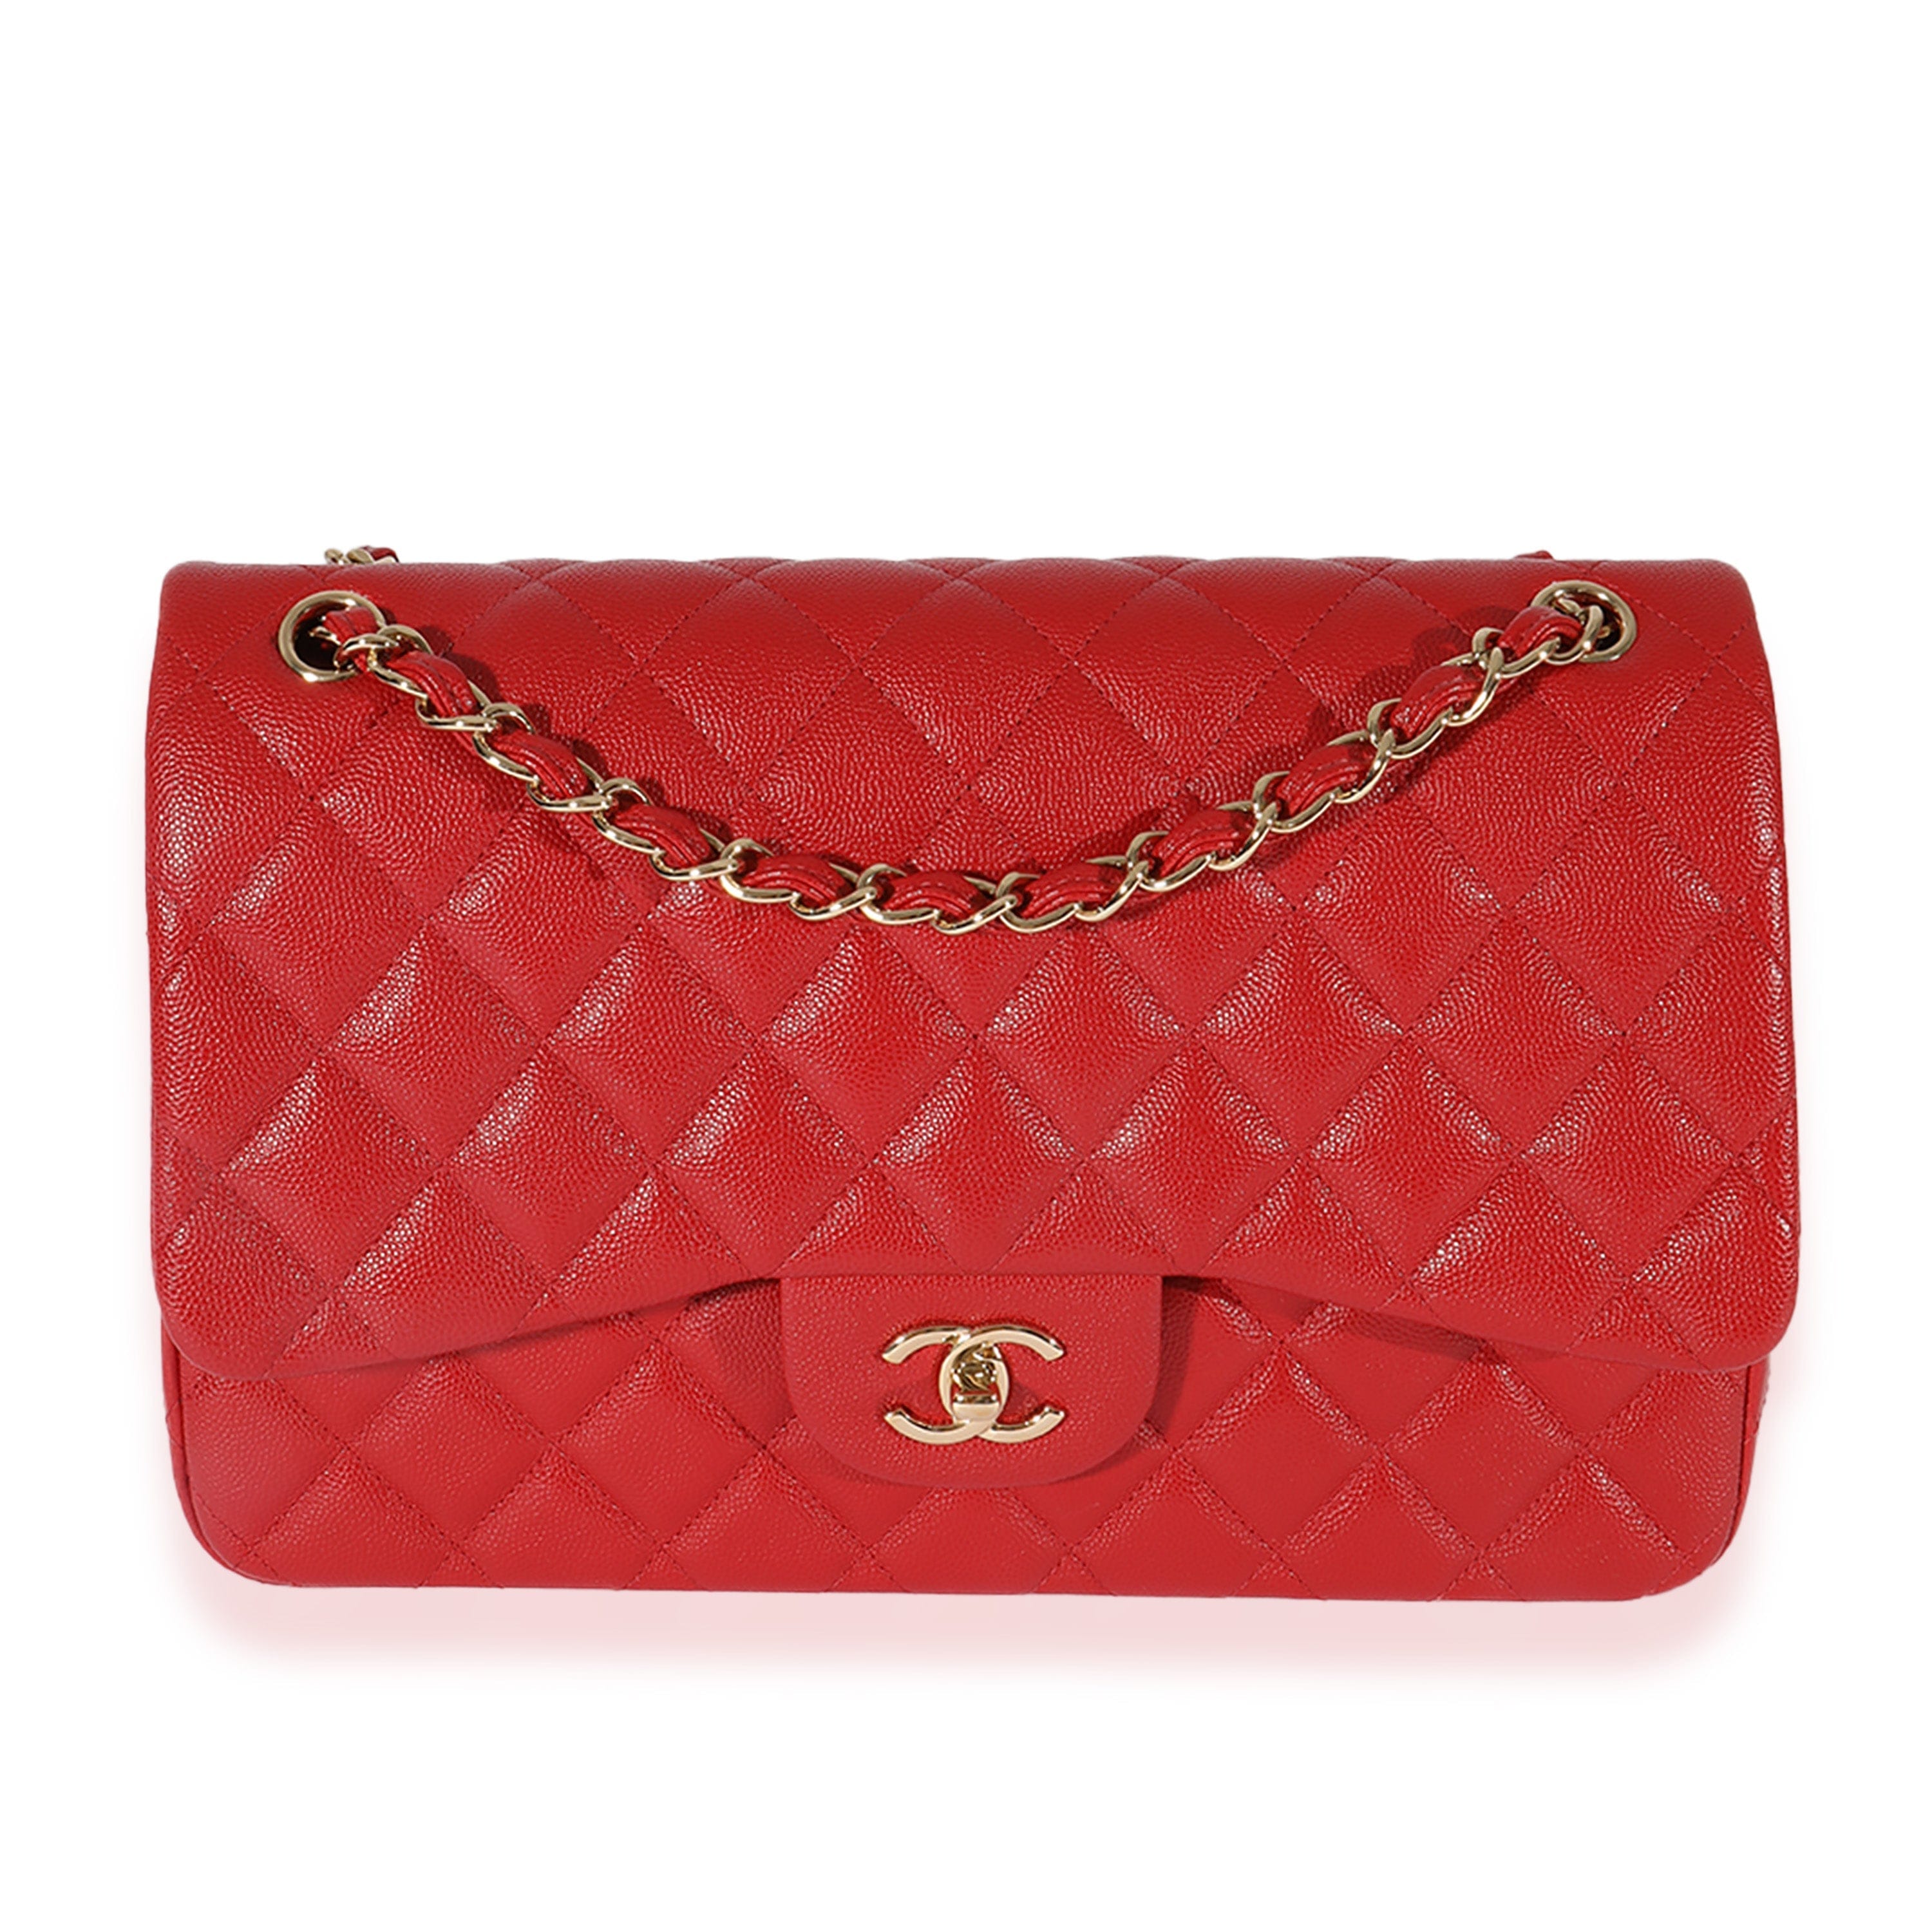 Chanel Classic Medium Perforated Double Flap Bag - Red Shoulder